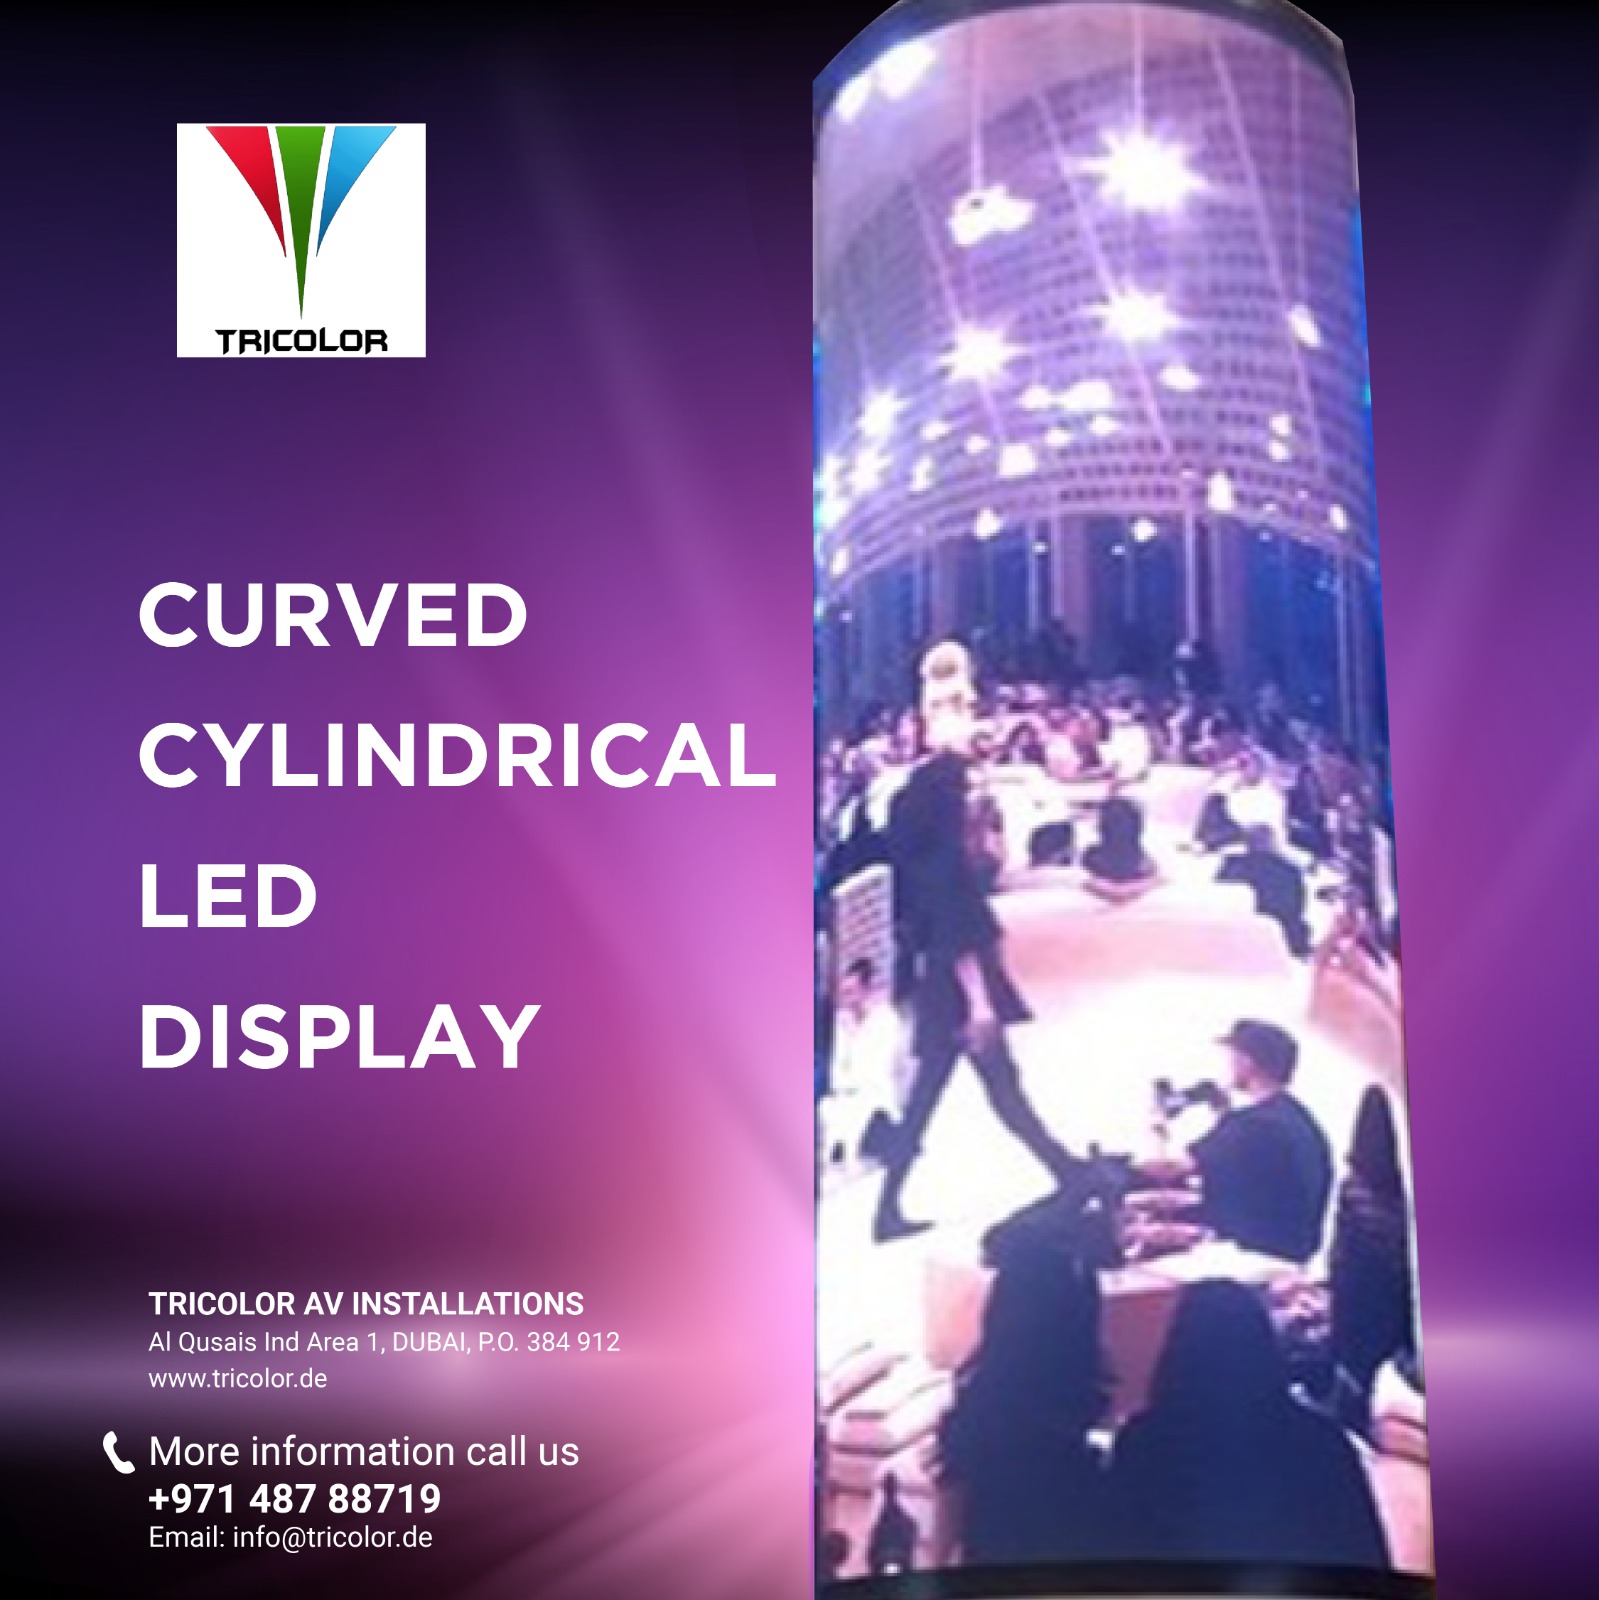 Curved and Flexible LED Screens in Dubai tricolor LED